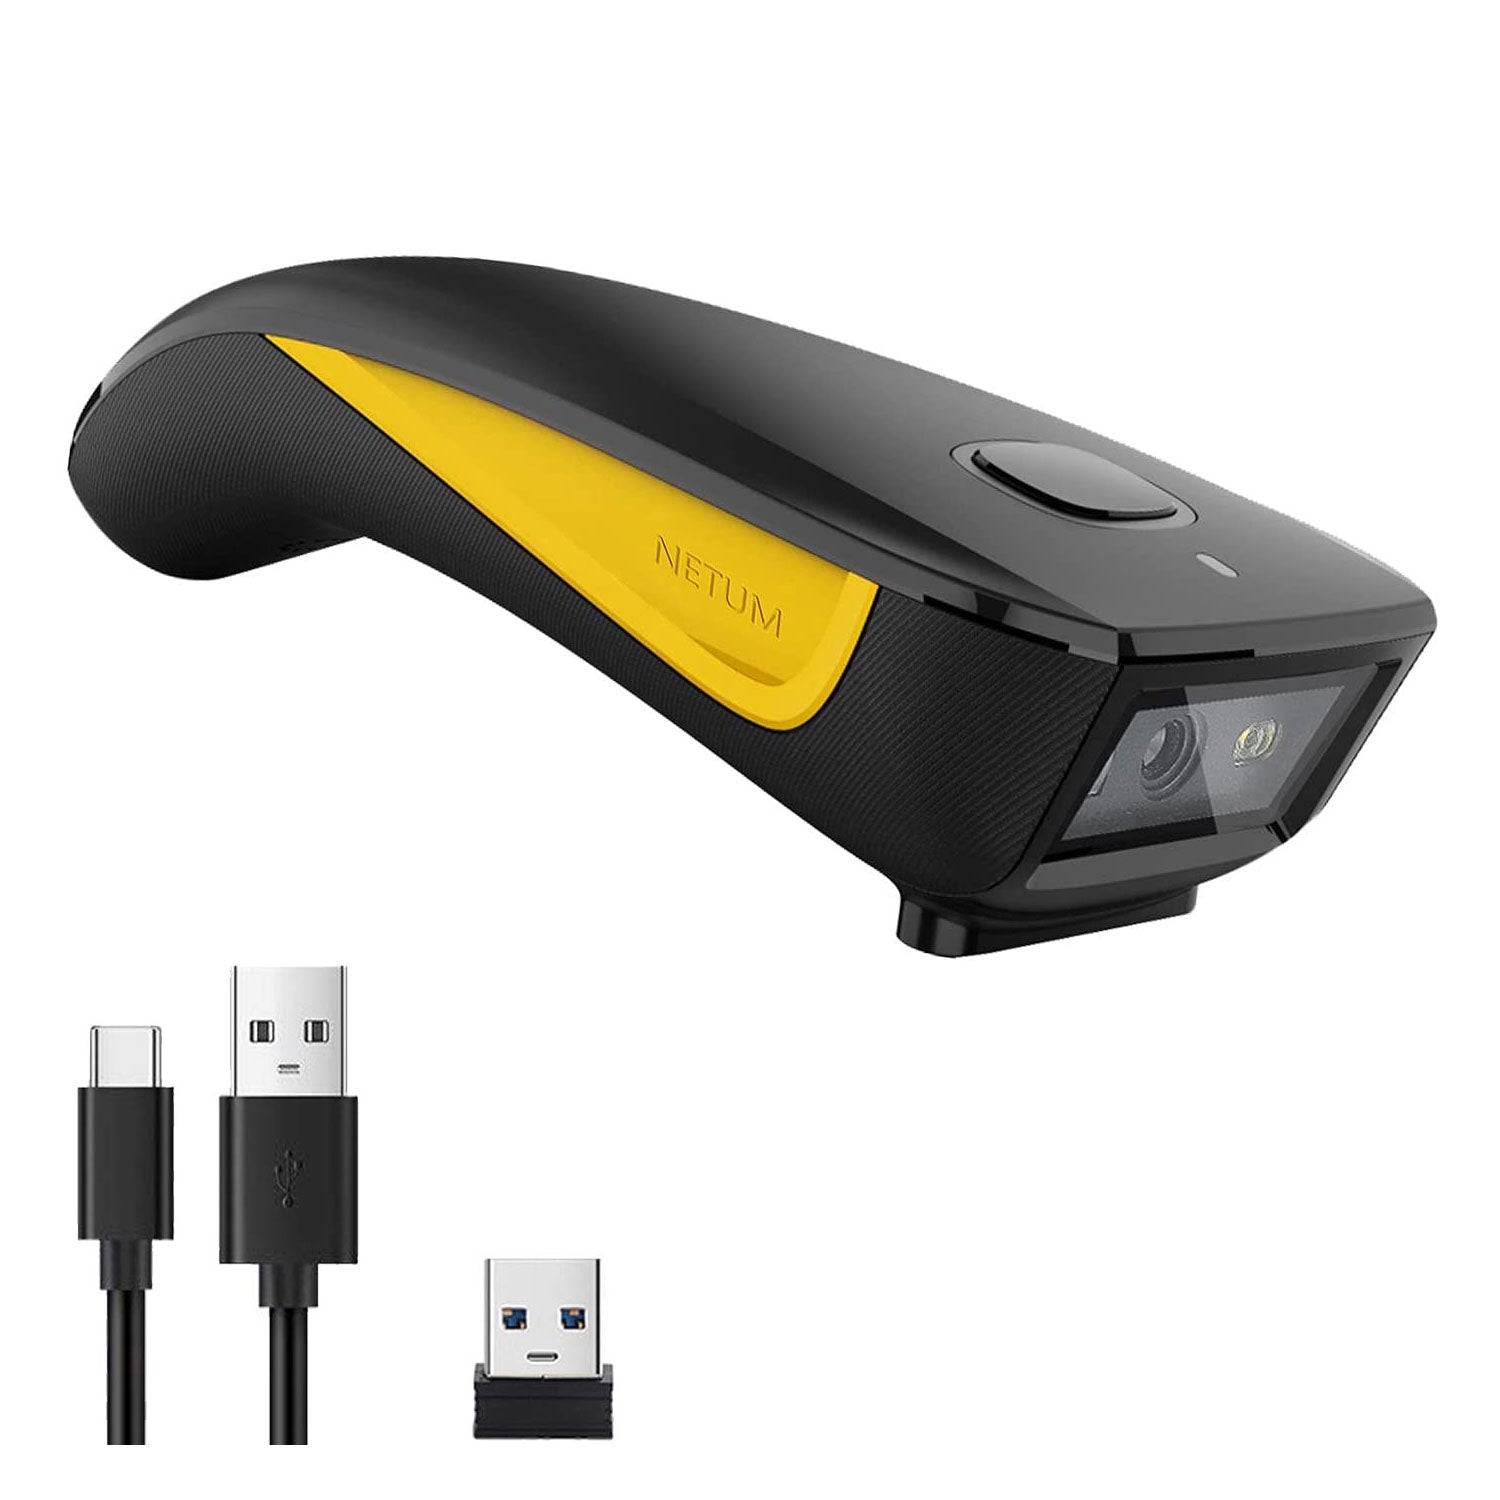 "Save up to $900!!" 50 pcs of Model C750 of NETUM Wireless 1D 2D /QR Barcode Scanner Compatible Bluetooth Connect Smart Phone, Tablet, PC with Free Shipping